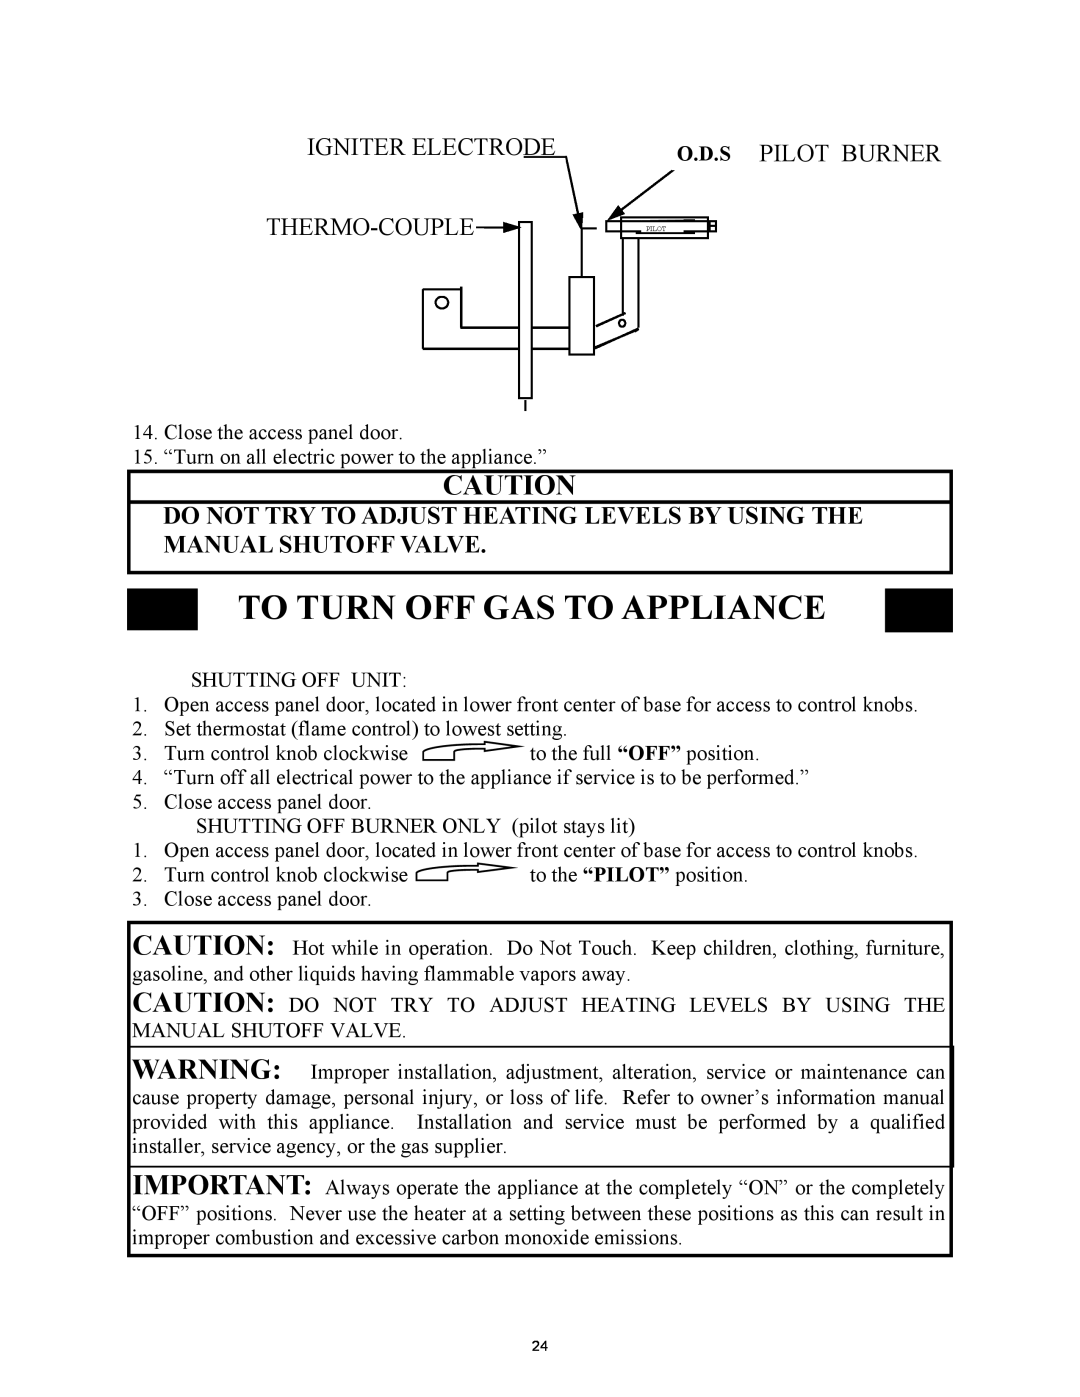 New Buck Corporation 1127B manual To Turn Off Gas To Appliance, Igniter Electrode Thermo-Couple, O.D.S Pilot Burner 